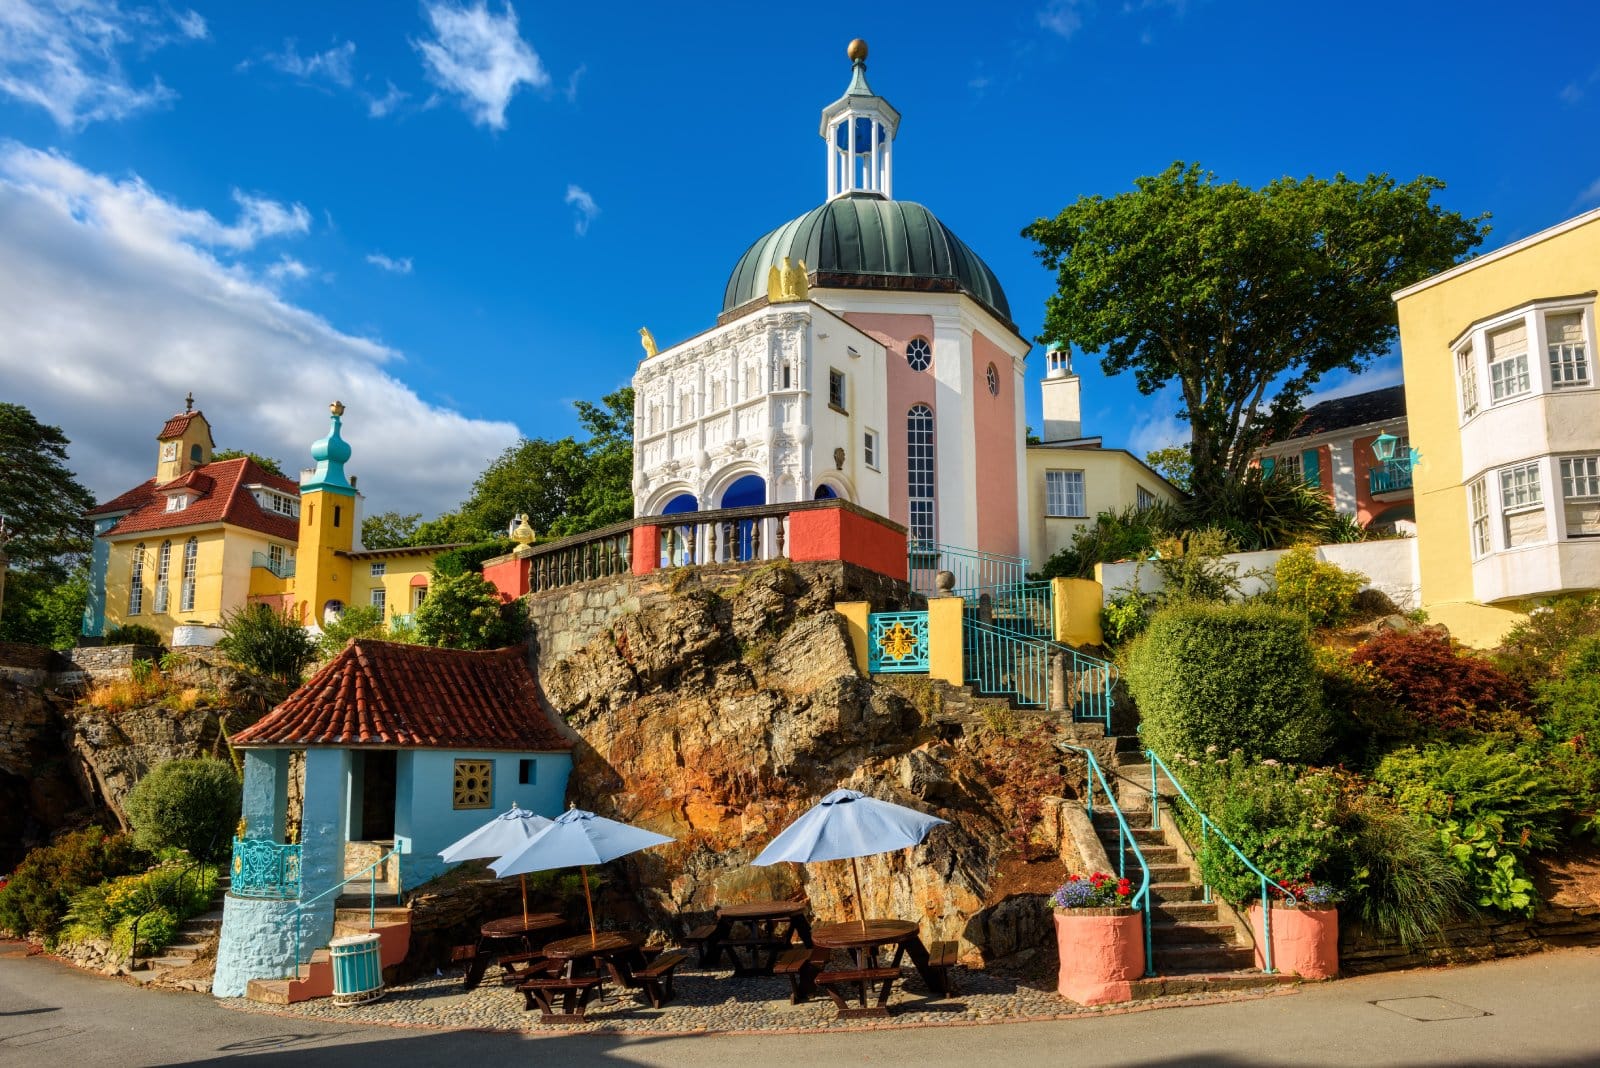 Image Credit: Shutterstock / Boris Stroujko <p>This Italianate village in North Wales is an architectural oddity and a visual feast. Be aware, though, that its beauty comes with admission fees and sometimes a sense of artificiality.</p>